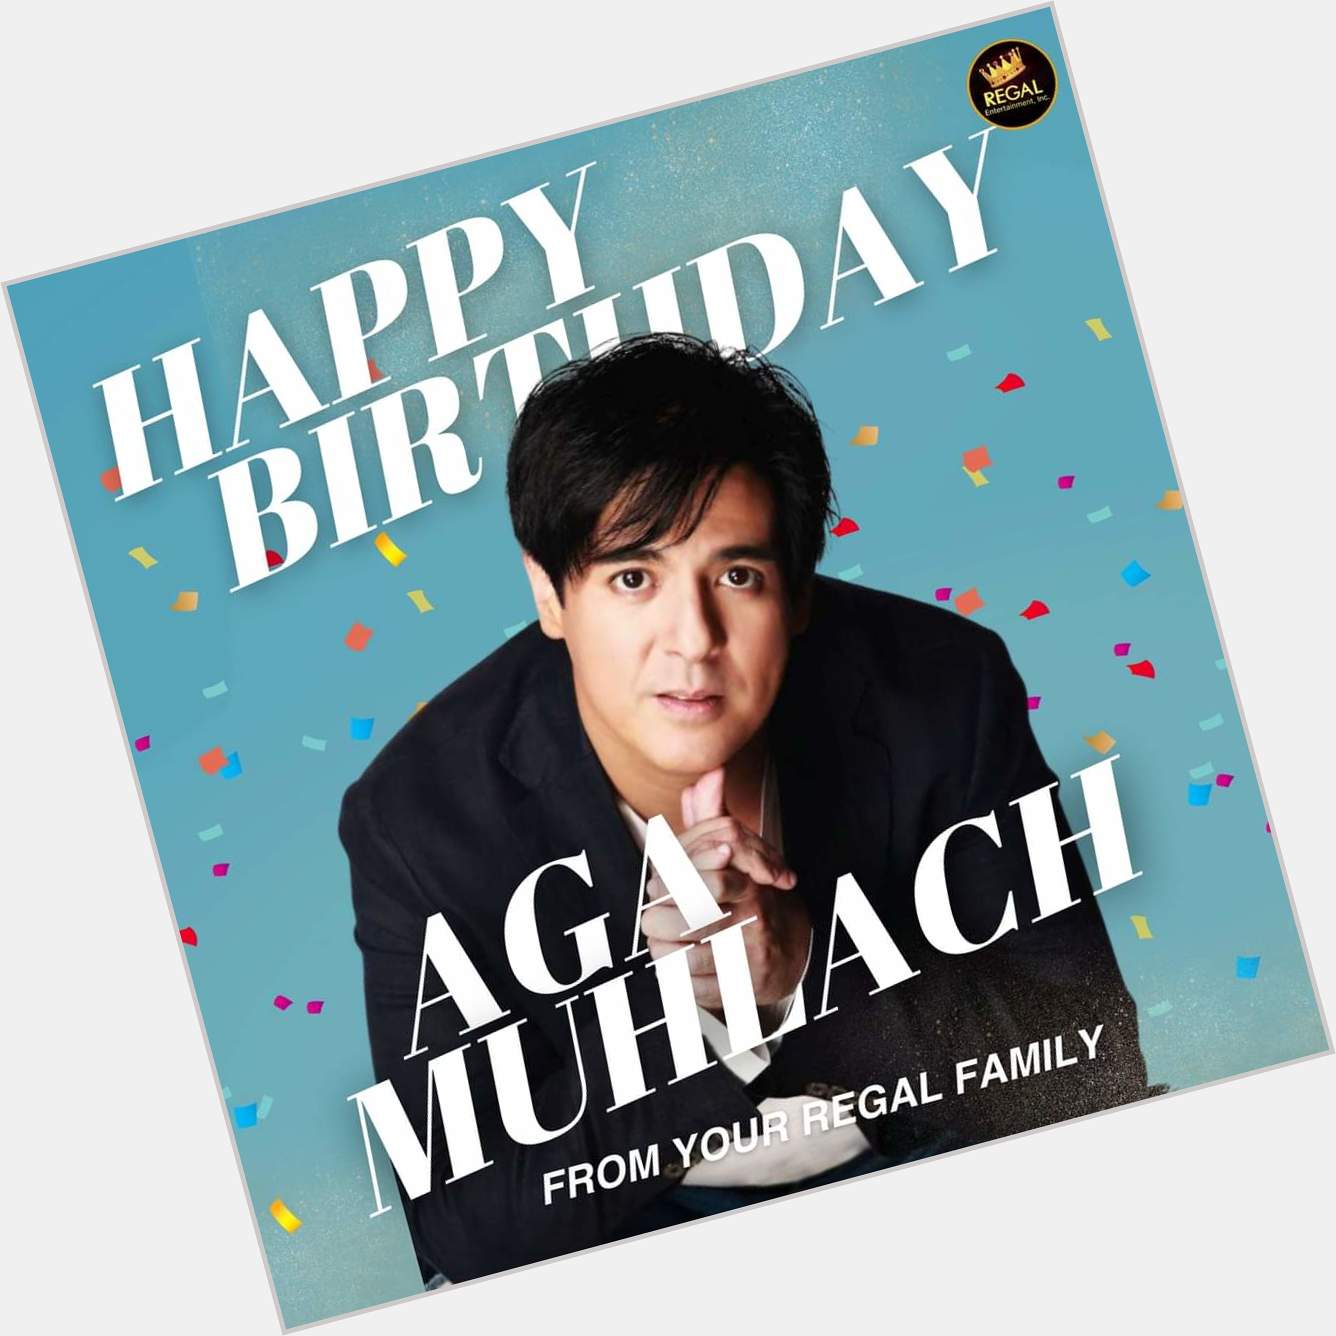 Happy Birthday, Aga Muhlach! We wish you all the best in life! God bless! From your Regal Family   